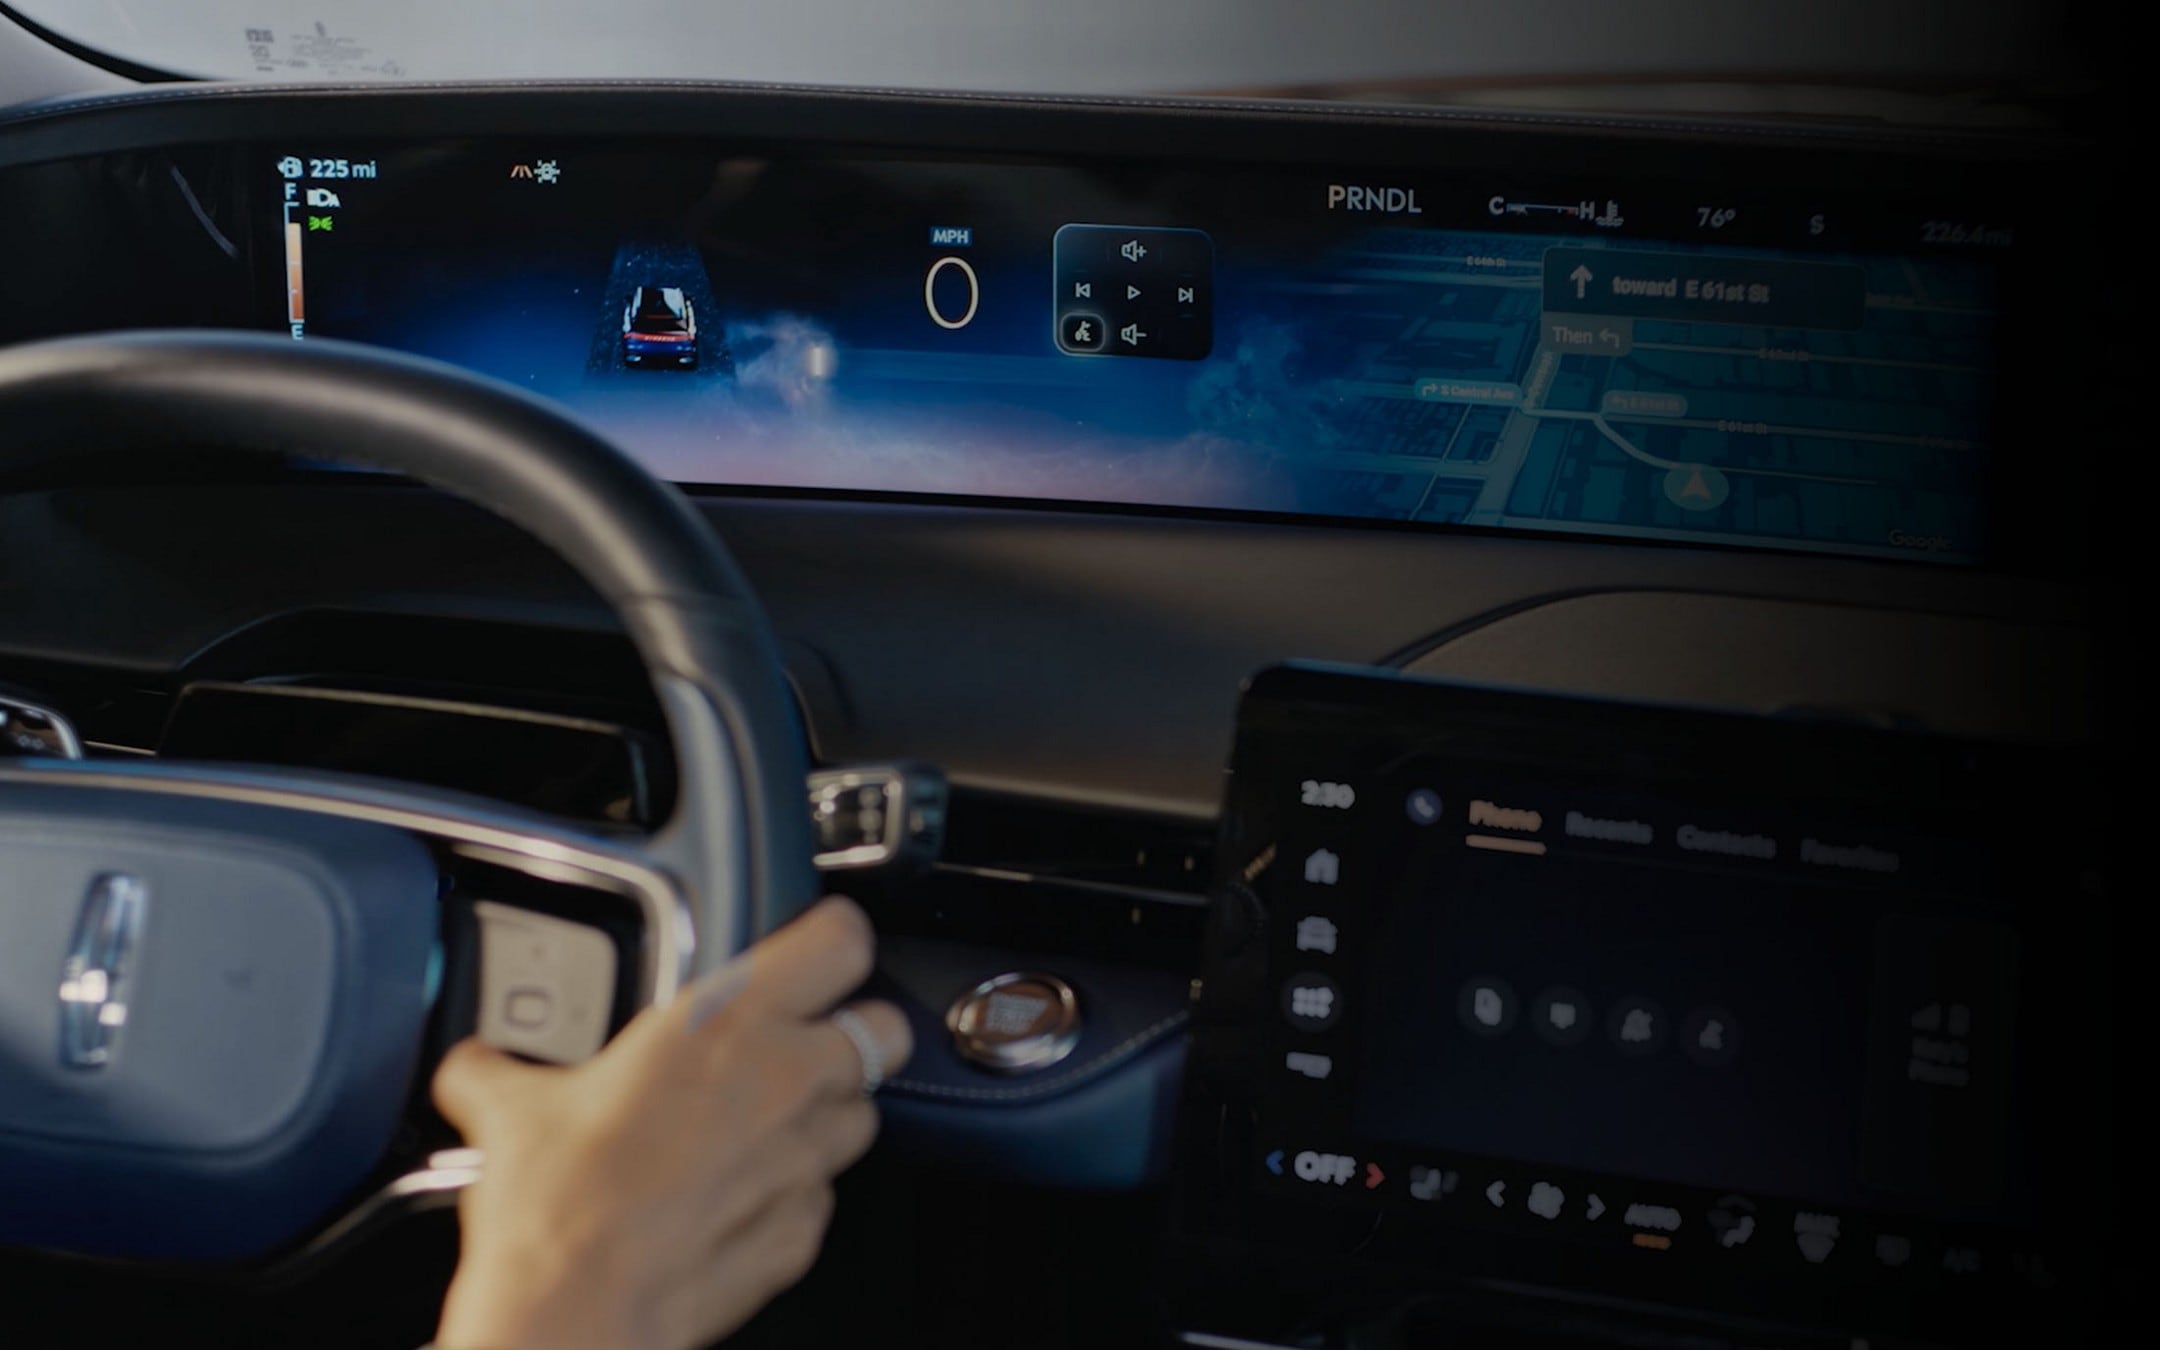 The driver of a 2025 Lincoln Nautilus® SUV interacts with capacitive touch steering wheel controls